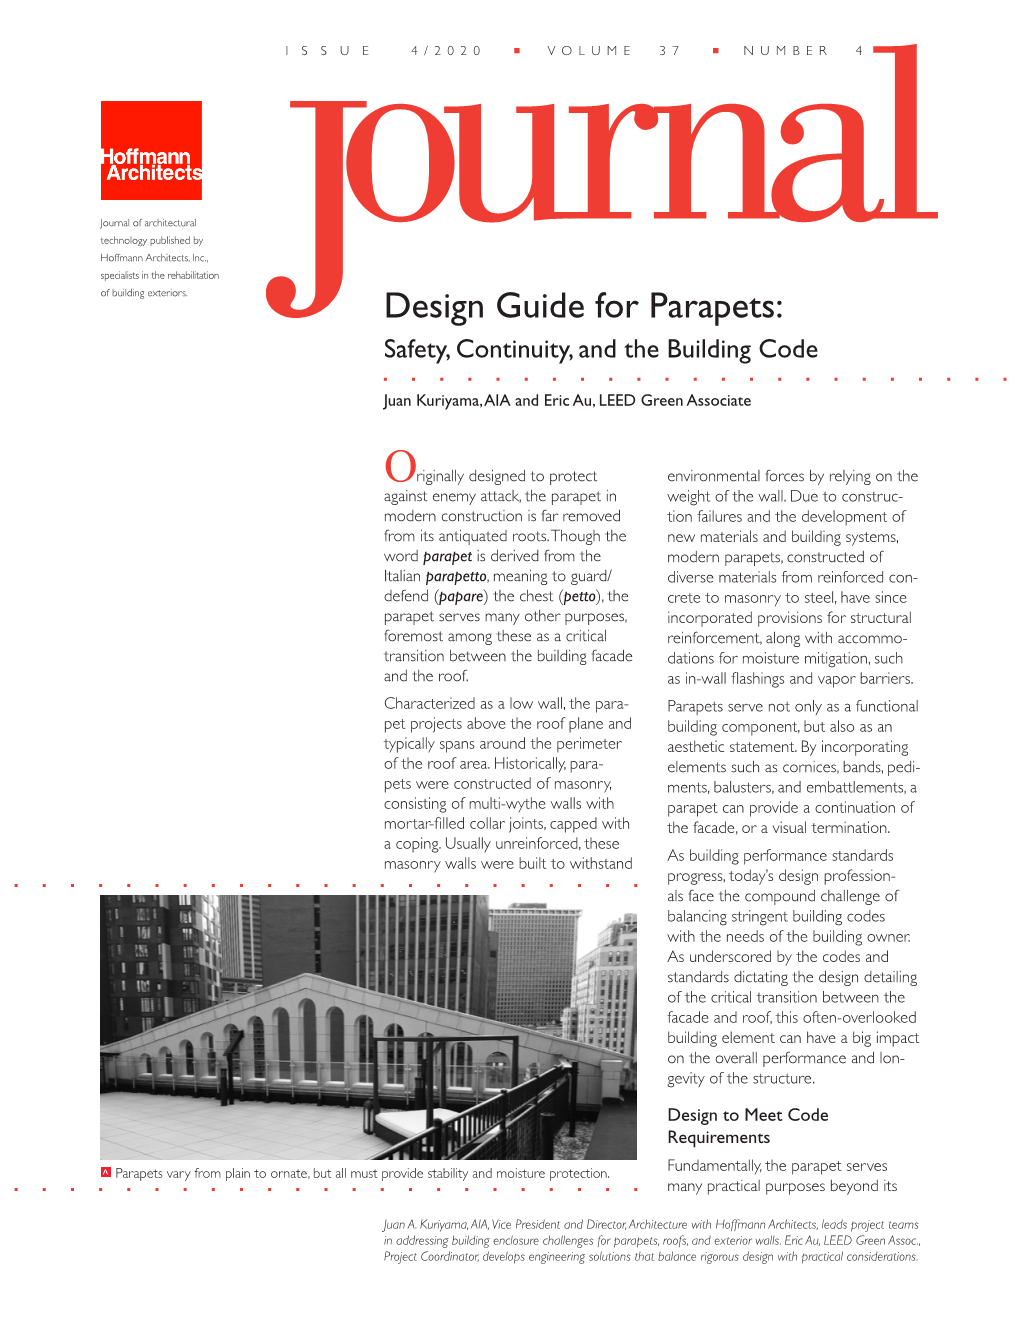 Design Guide for Parapets: Safety, Continuity, and the Building Code